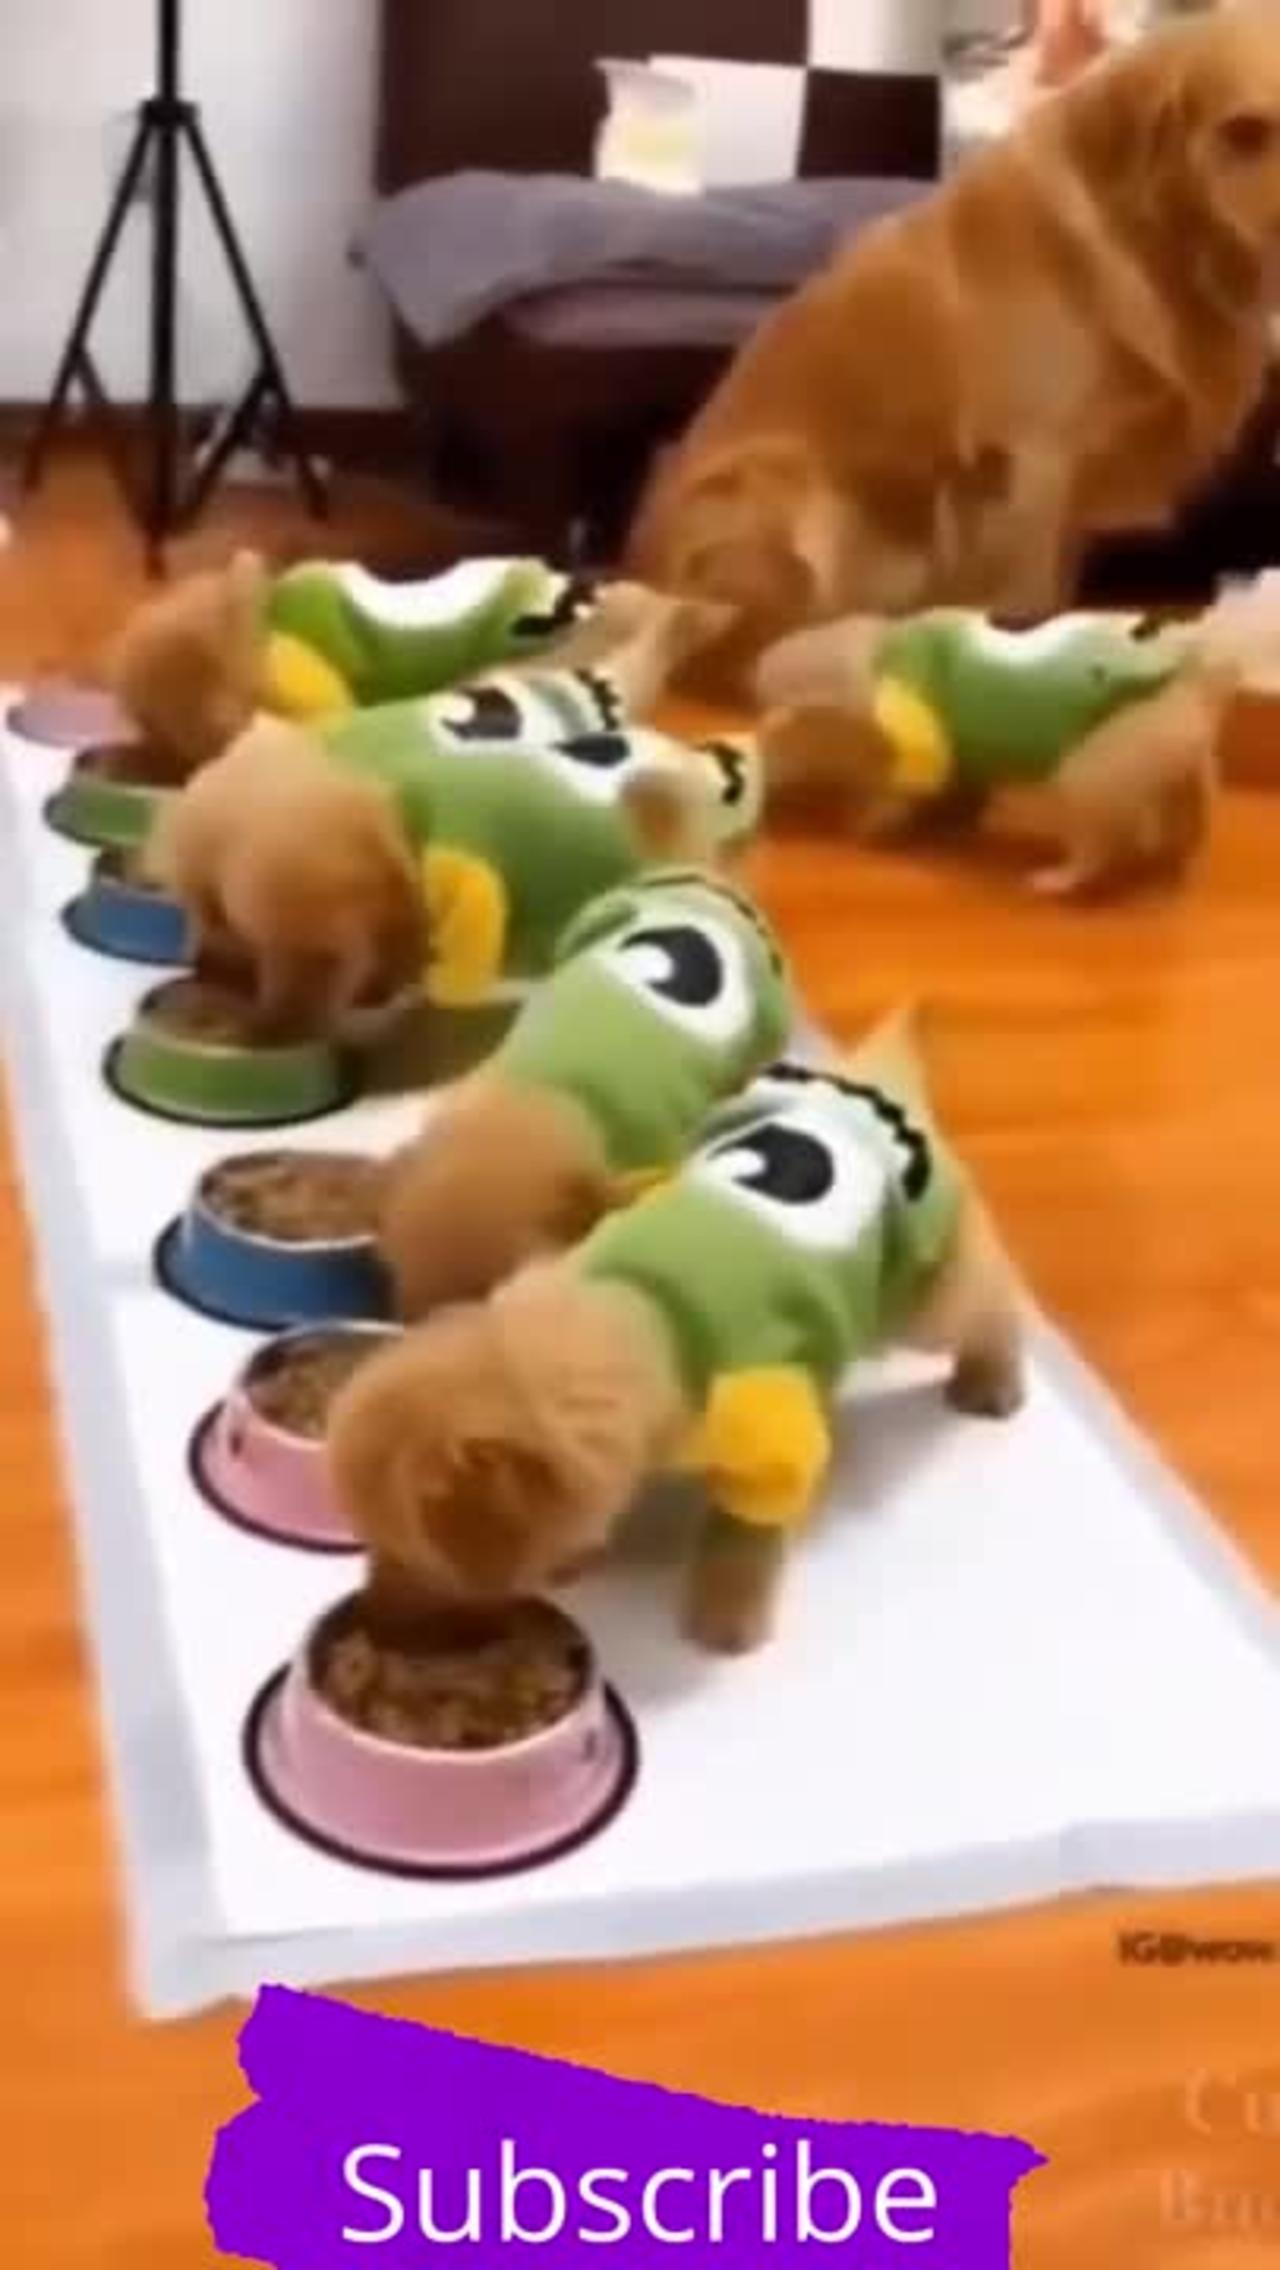 So Funny Cute sweetest puppies !! Mom Dog with Puppies Tik Tok !!